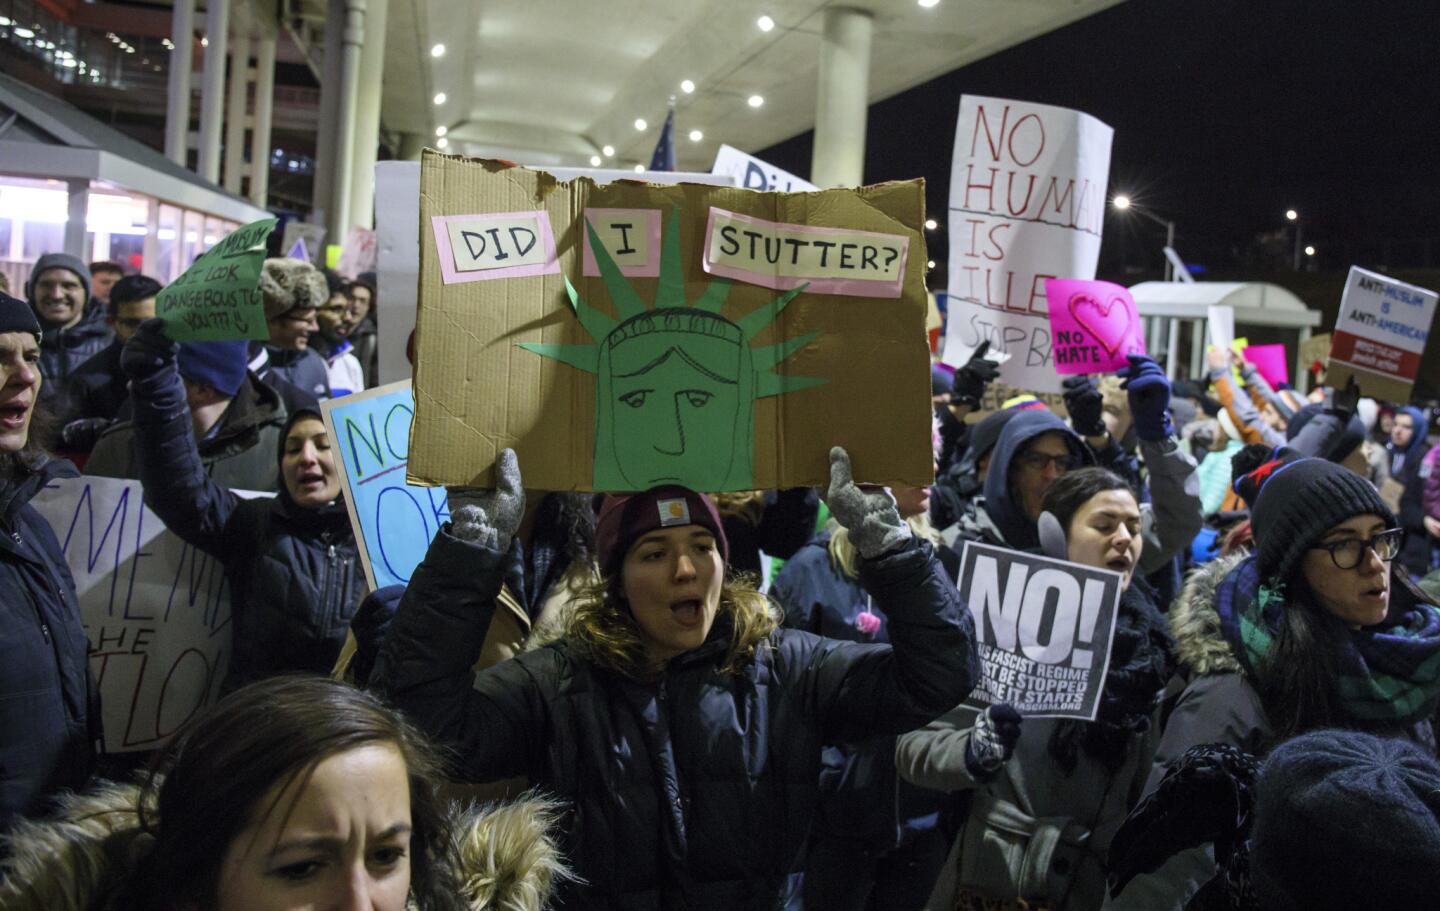 Protests at O'Hare